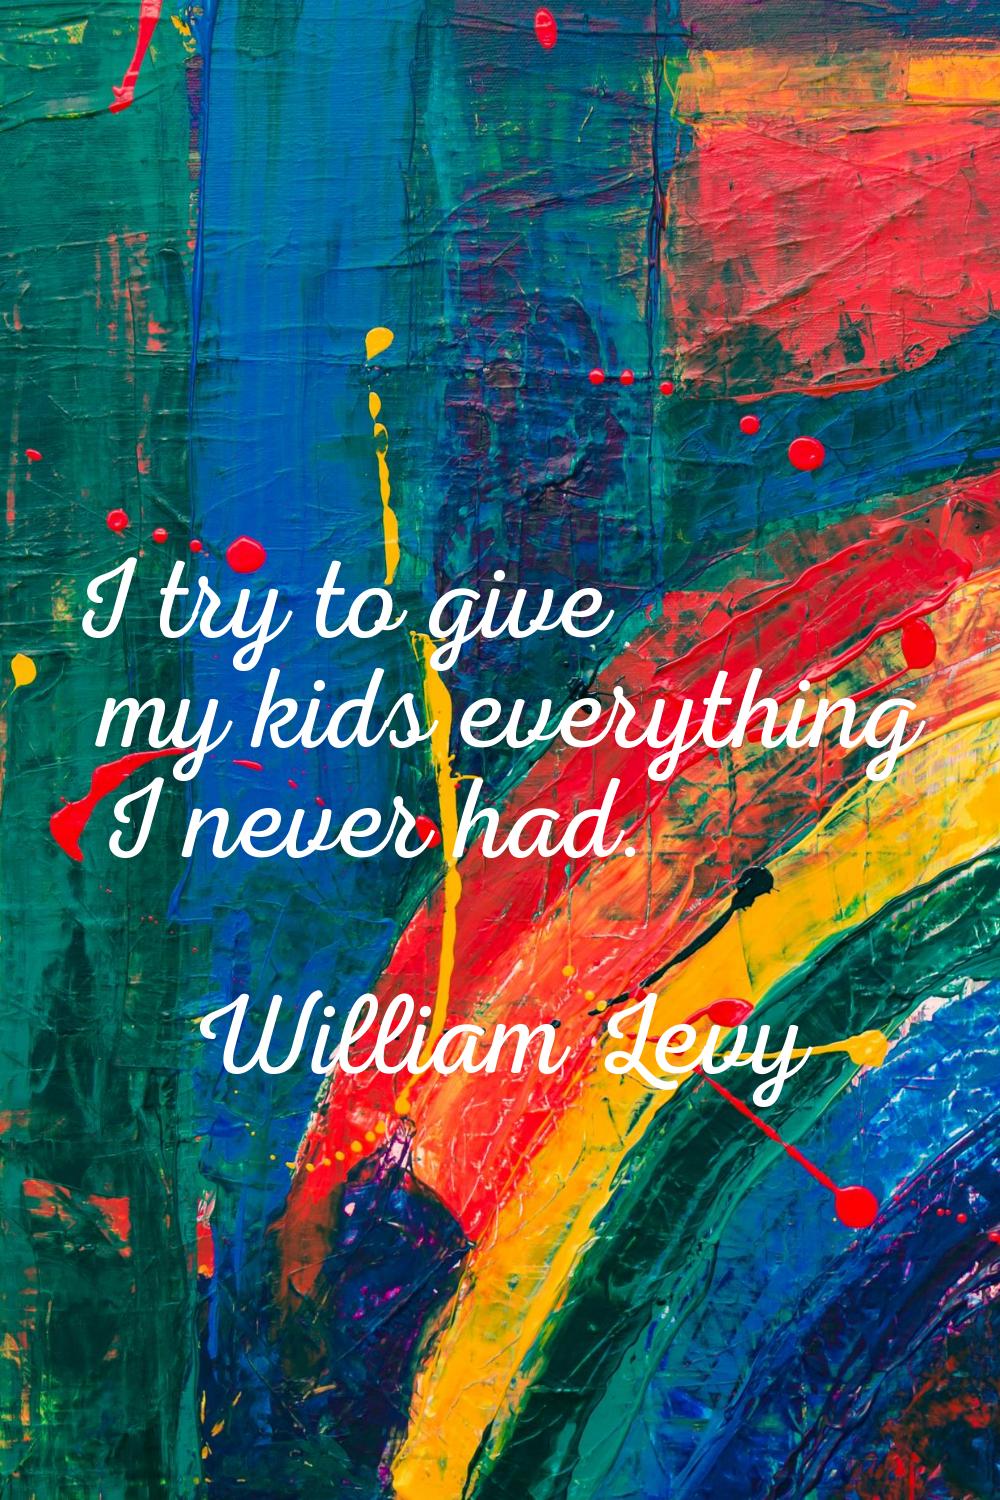 I try to give my kids everything I never had.